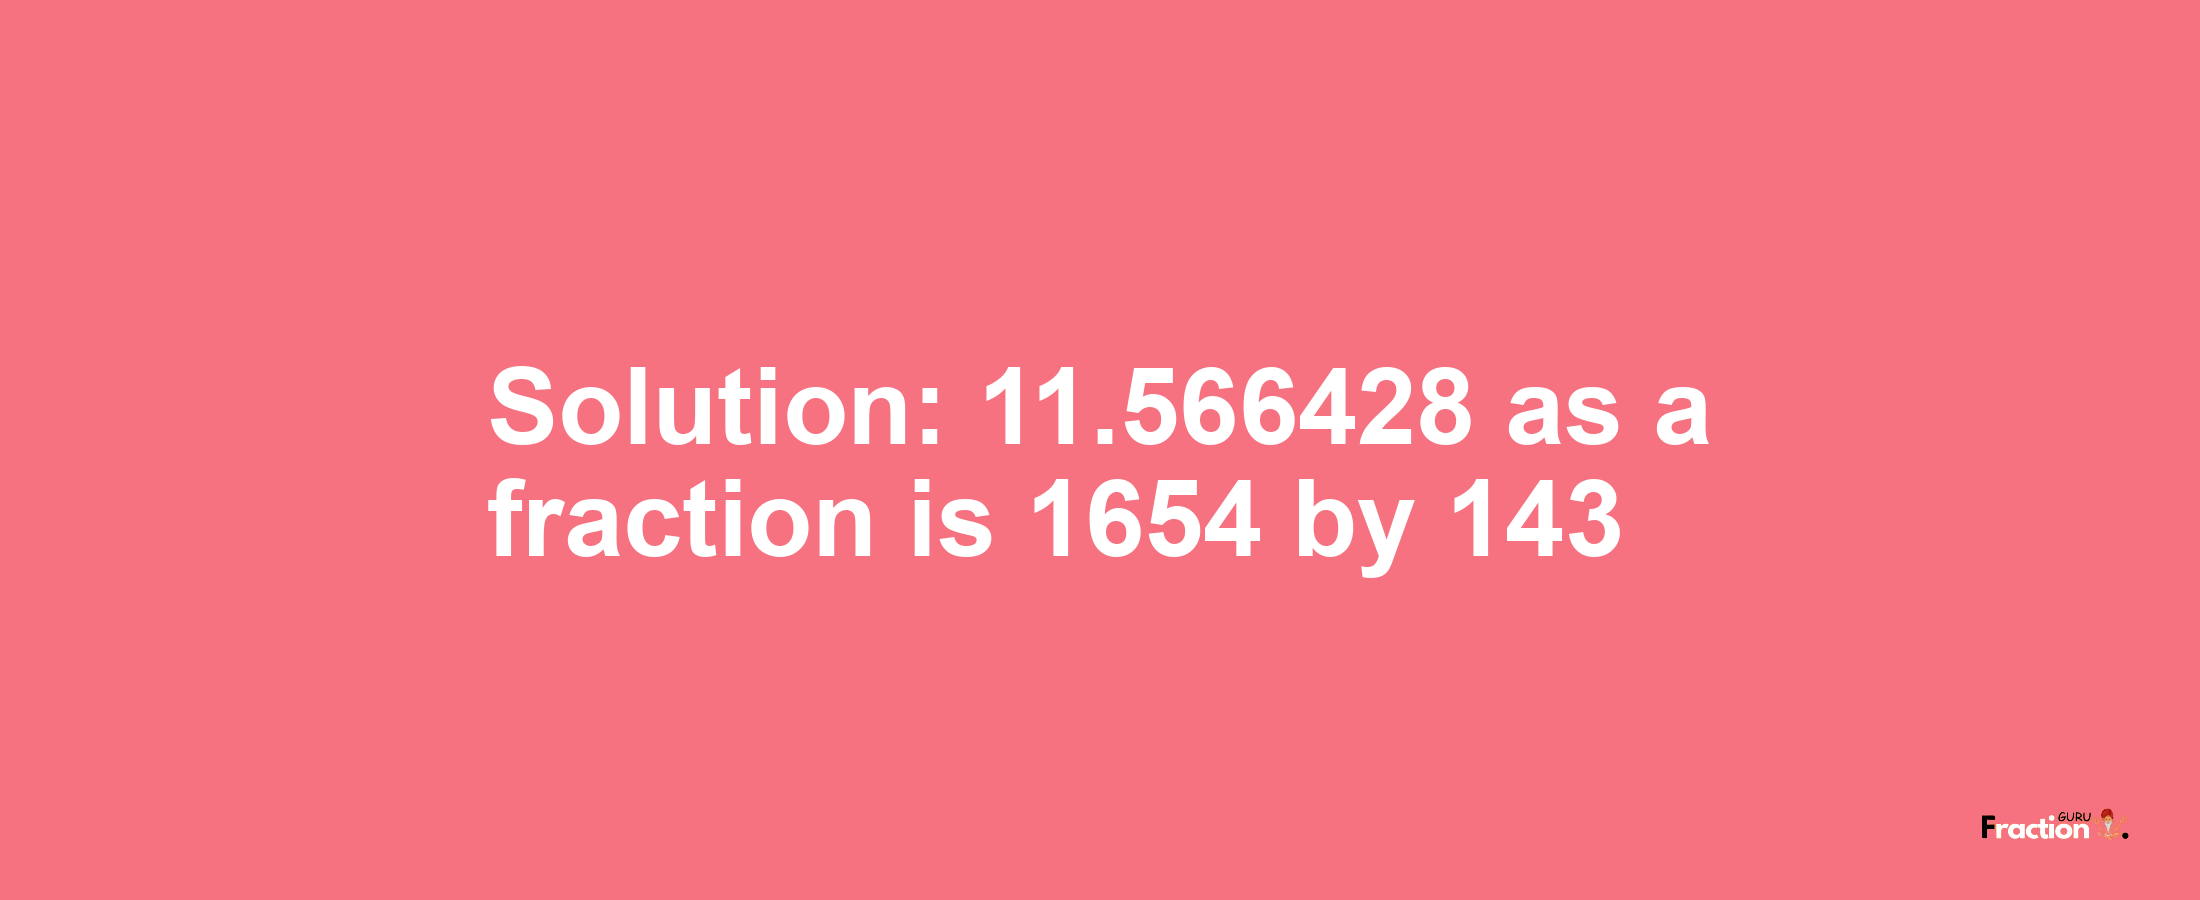 Solution:11.566428 as a fraction is 1654/143